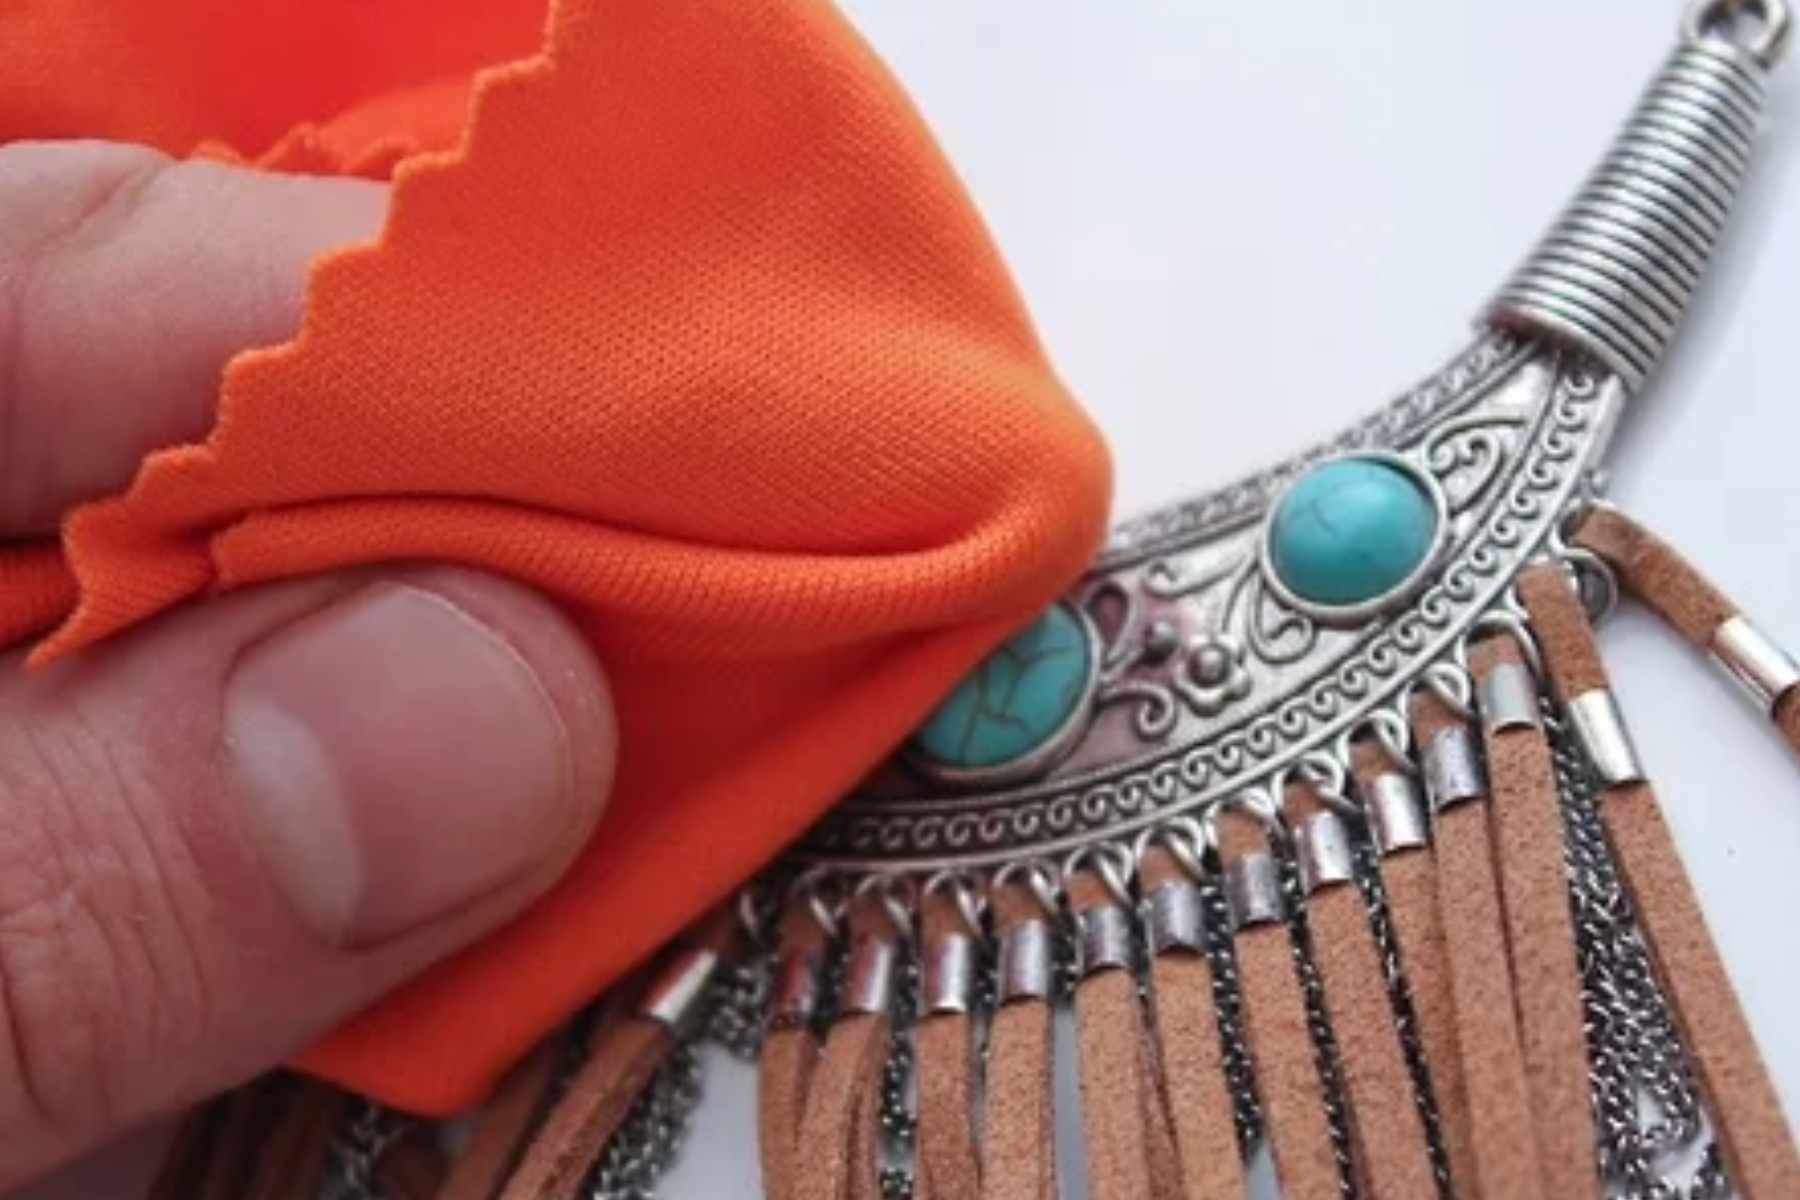 The hand of a man polishing a turquoise necklace with orange cotton